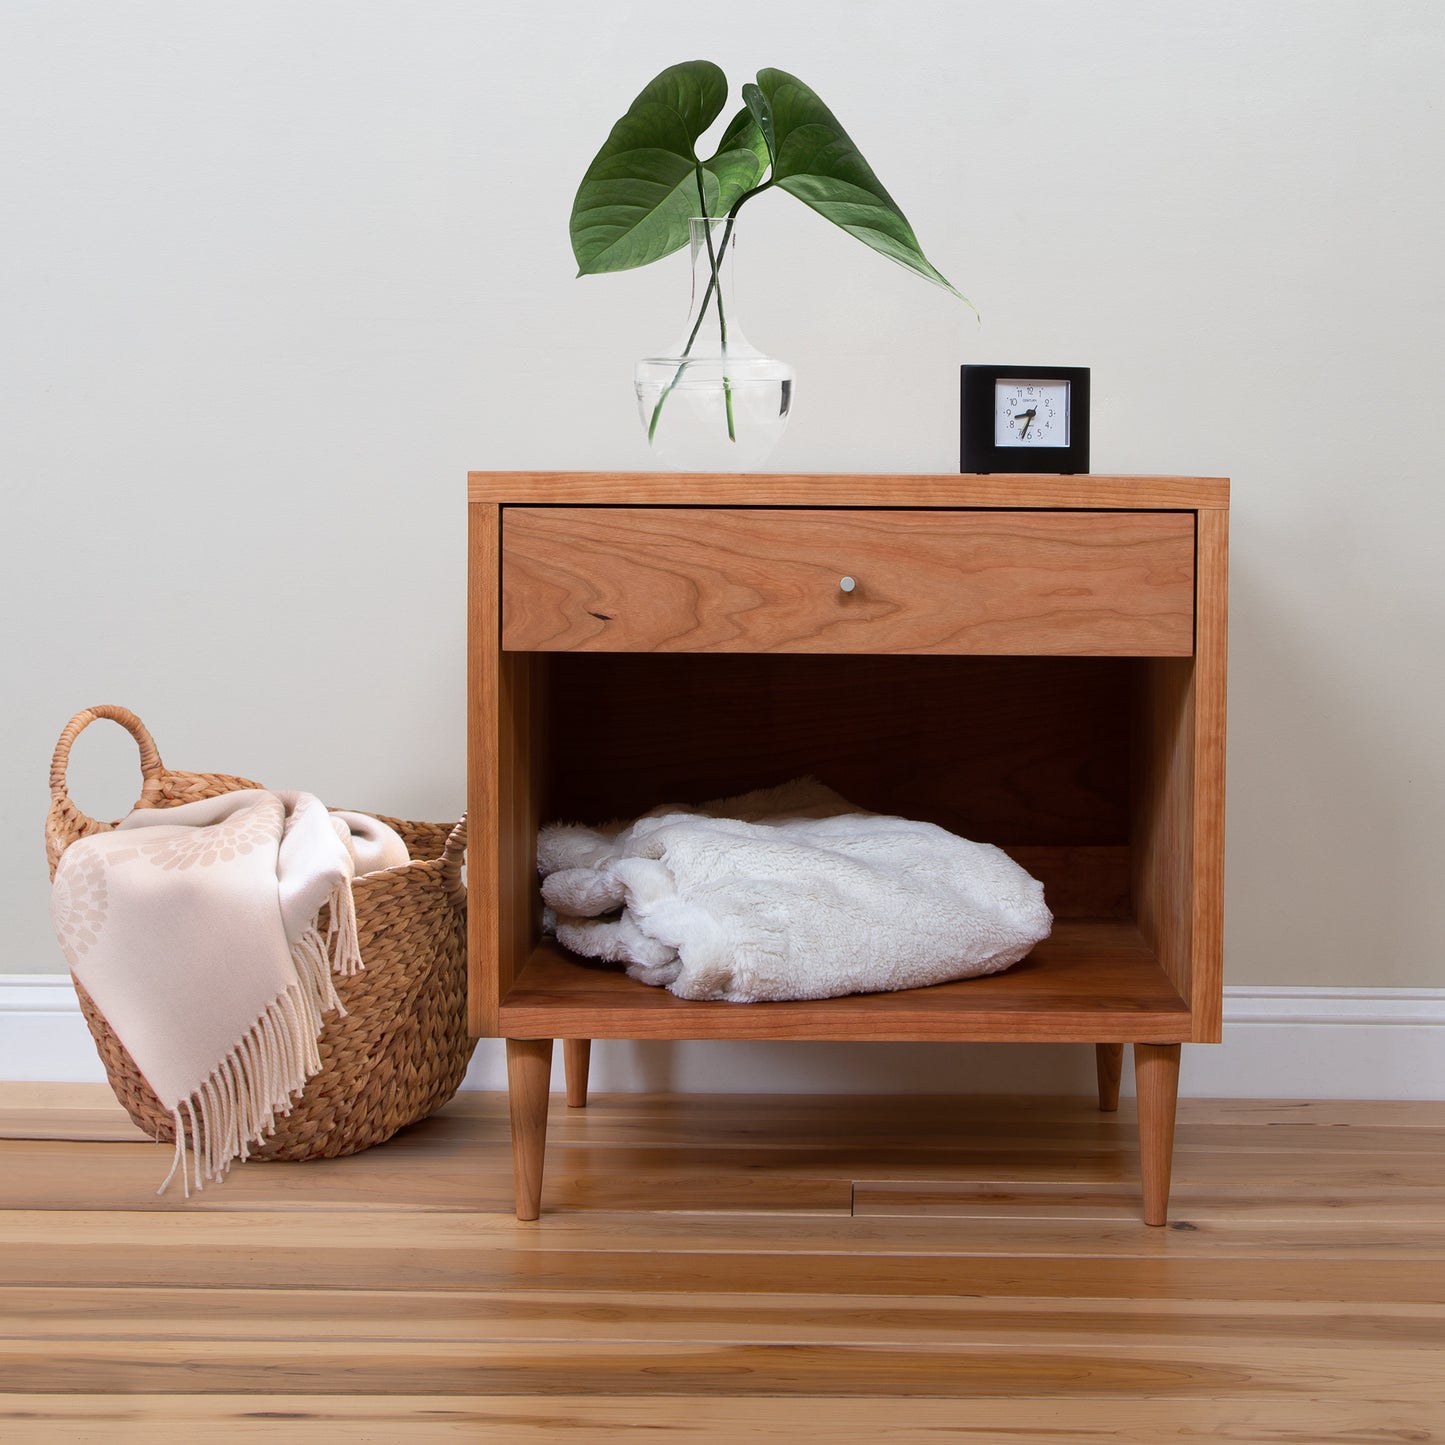 A Larssen 1-Drawer Wide Nightstand following a Mid-Century Modern Design, with an open drawer containing folded towels, next to a wicker basket with a draped blanket, under a hanging plant, against a neutral.